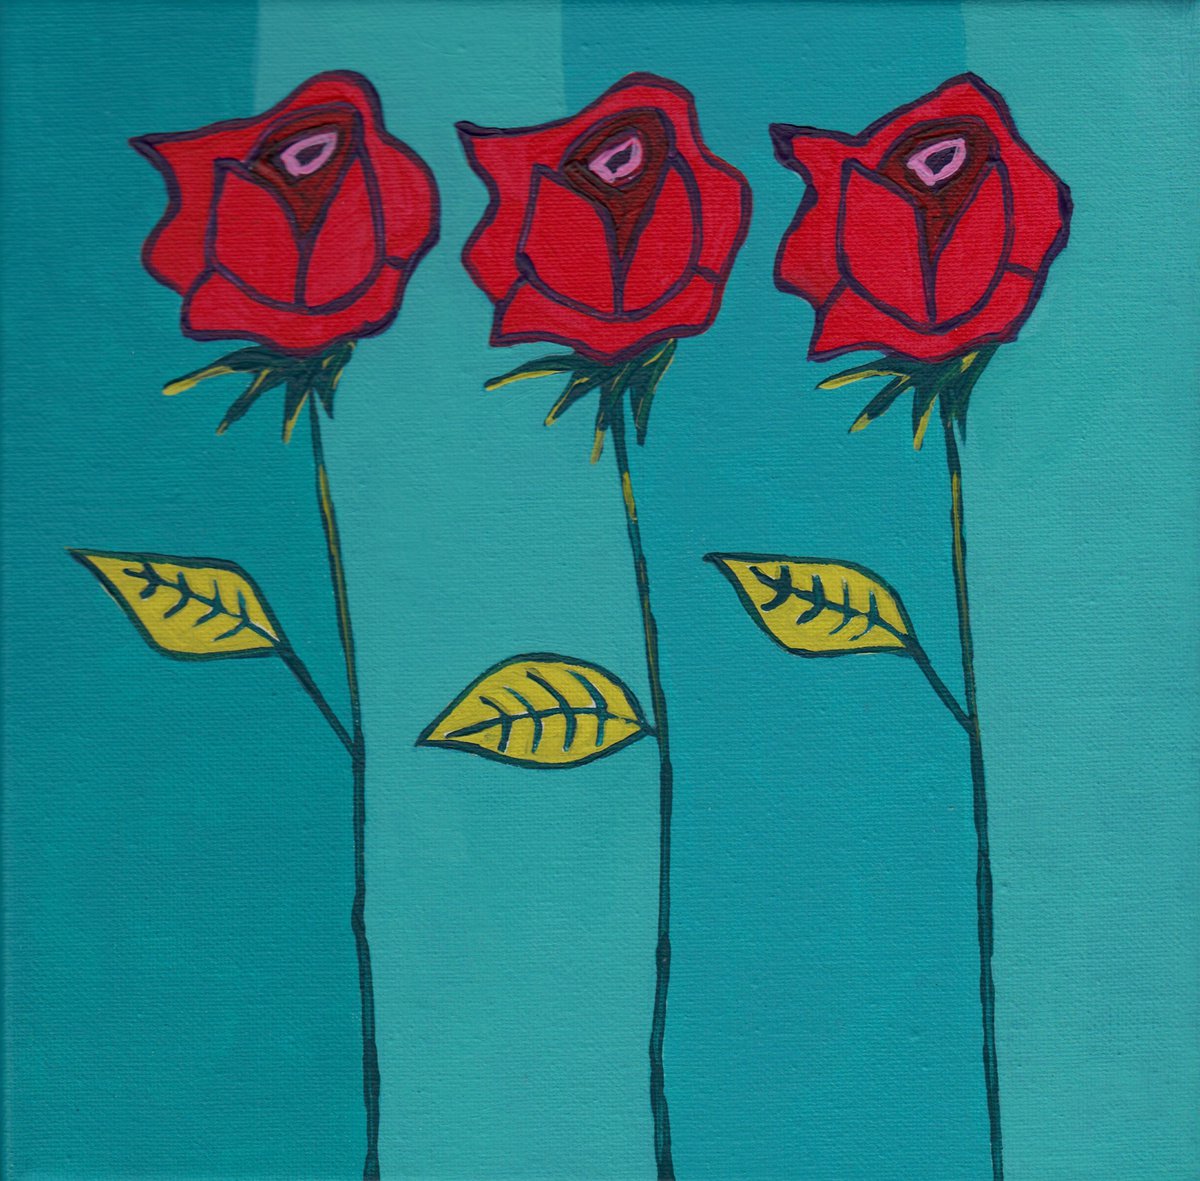 Red Roses by Linda Monk